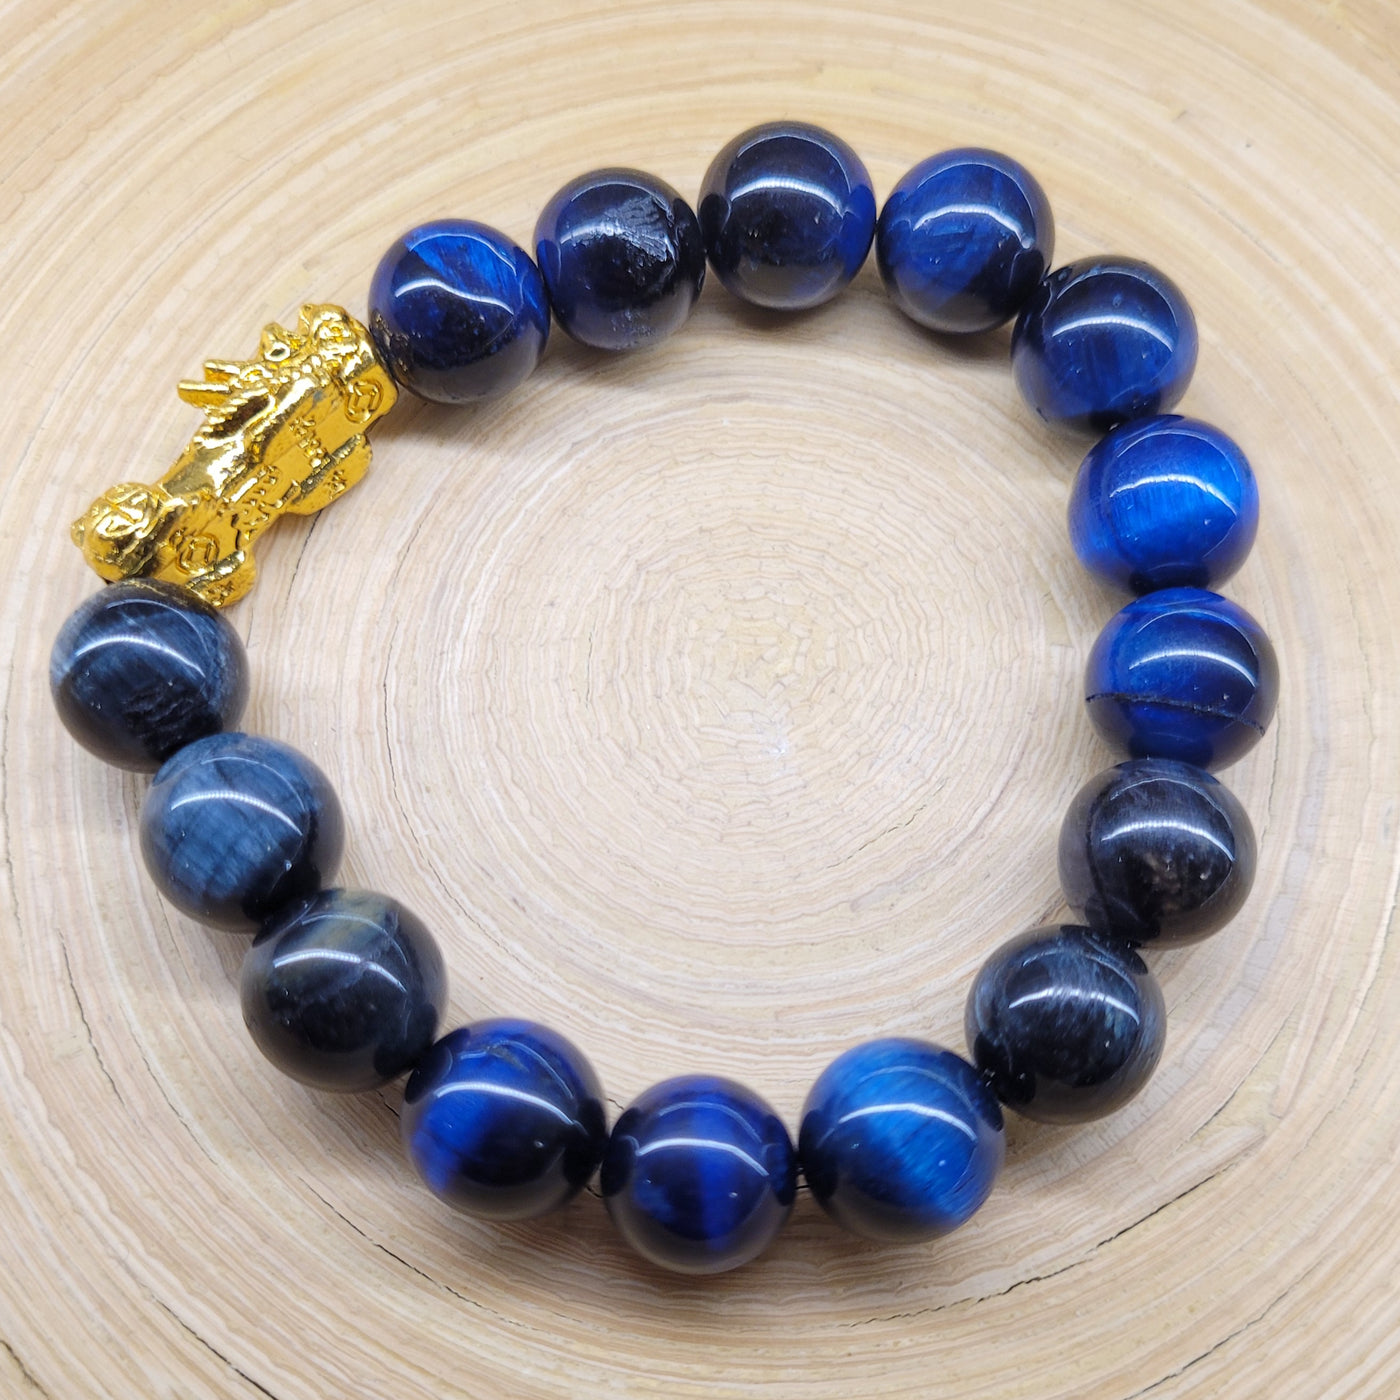 Blue tiger eye with golden charm Bracelet by Designs by Val